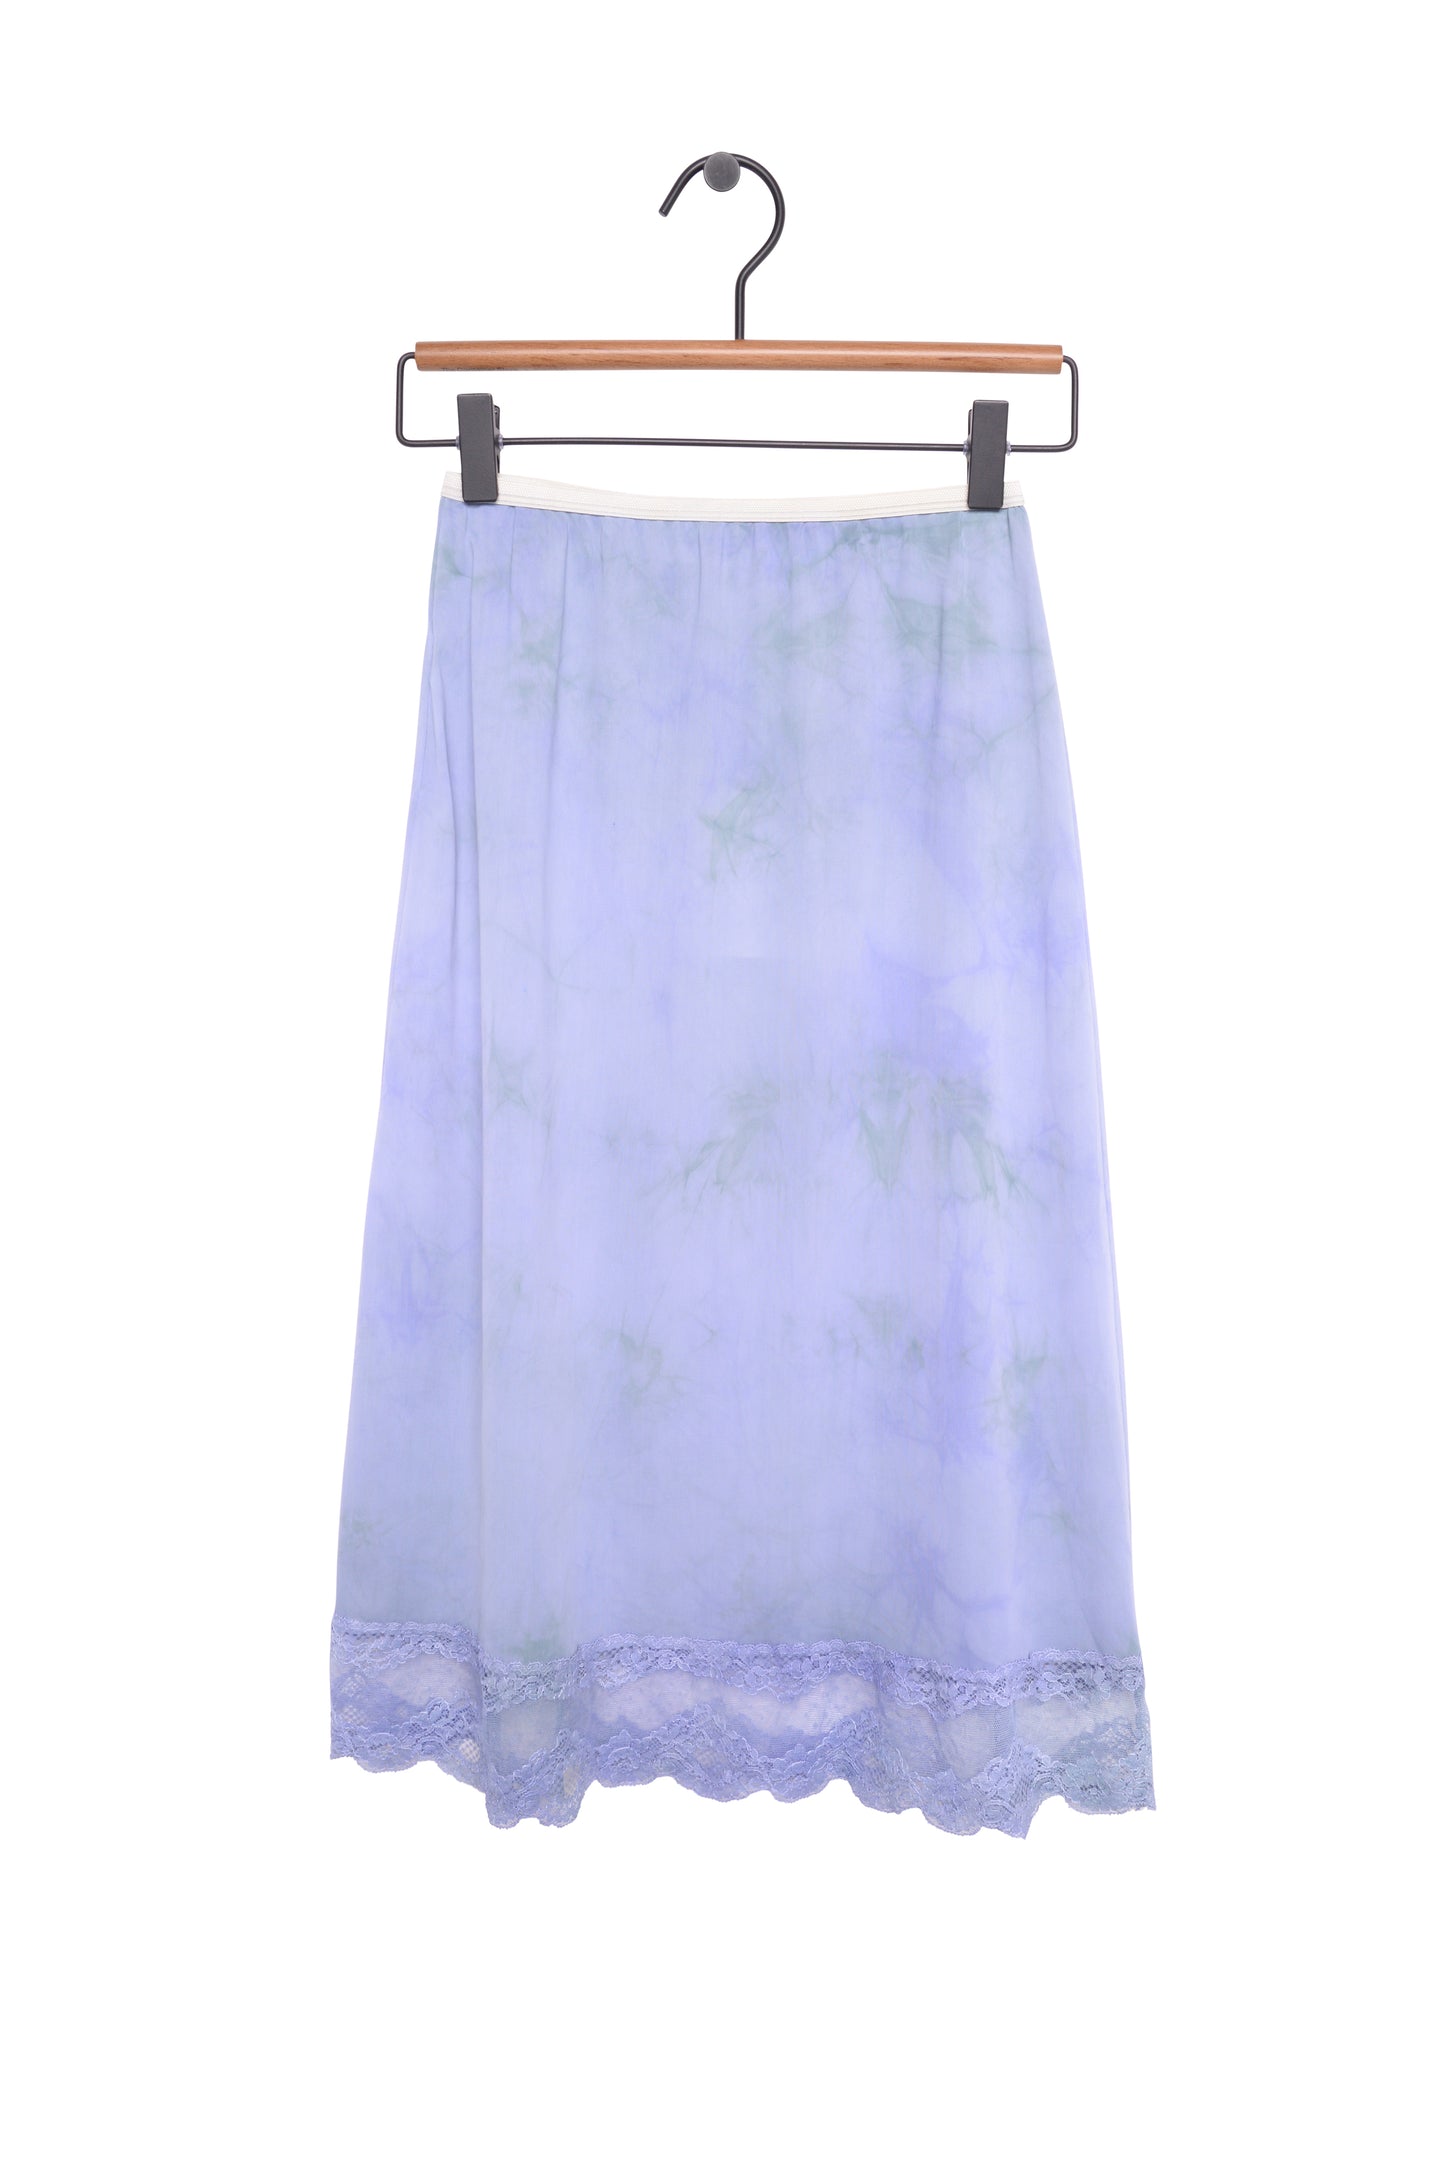 Hand-Dyed Lace Trim Slip Skirt